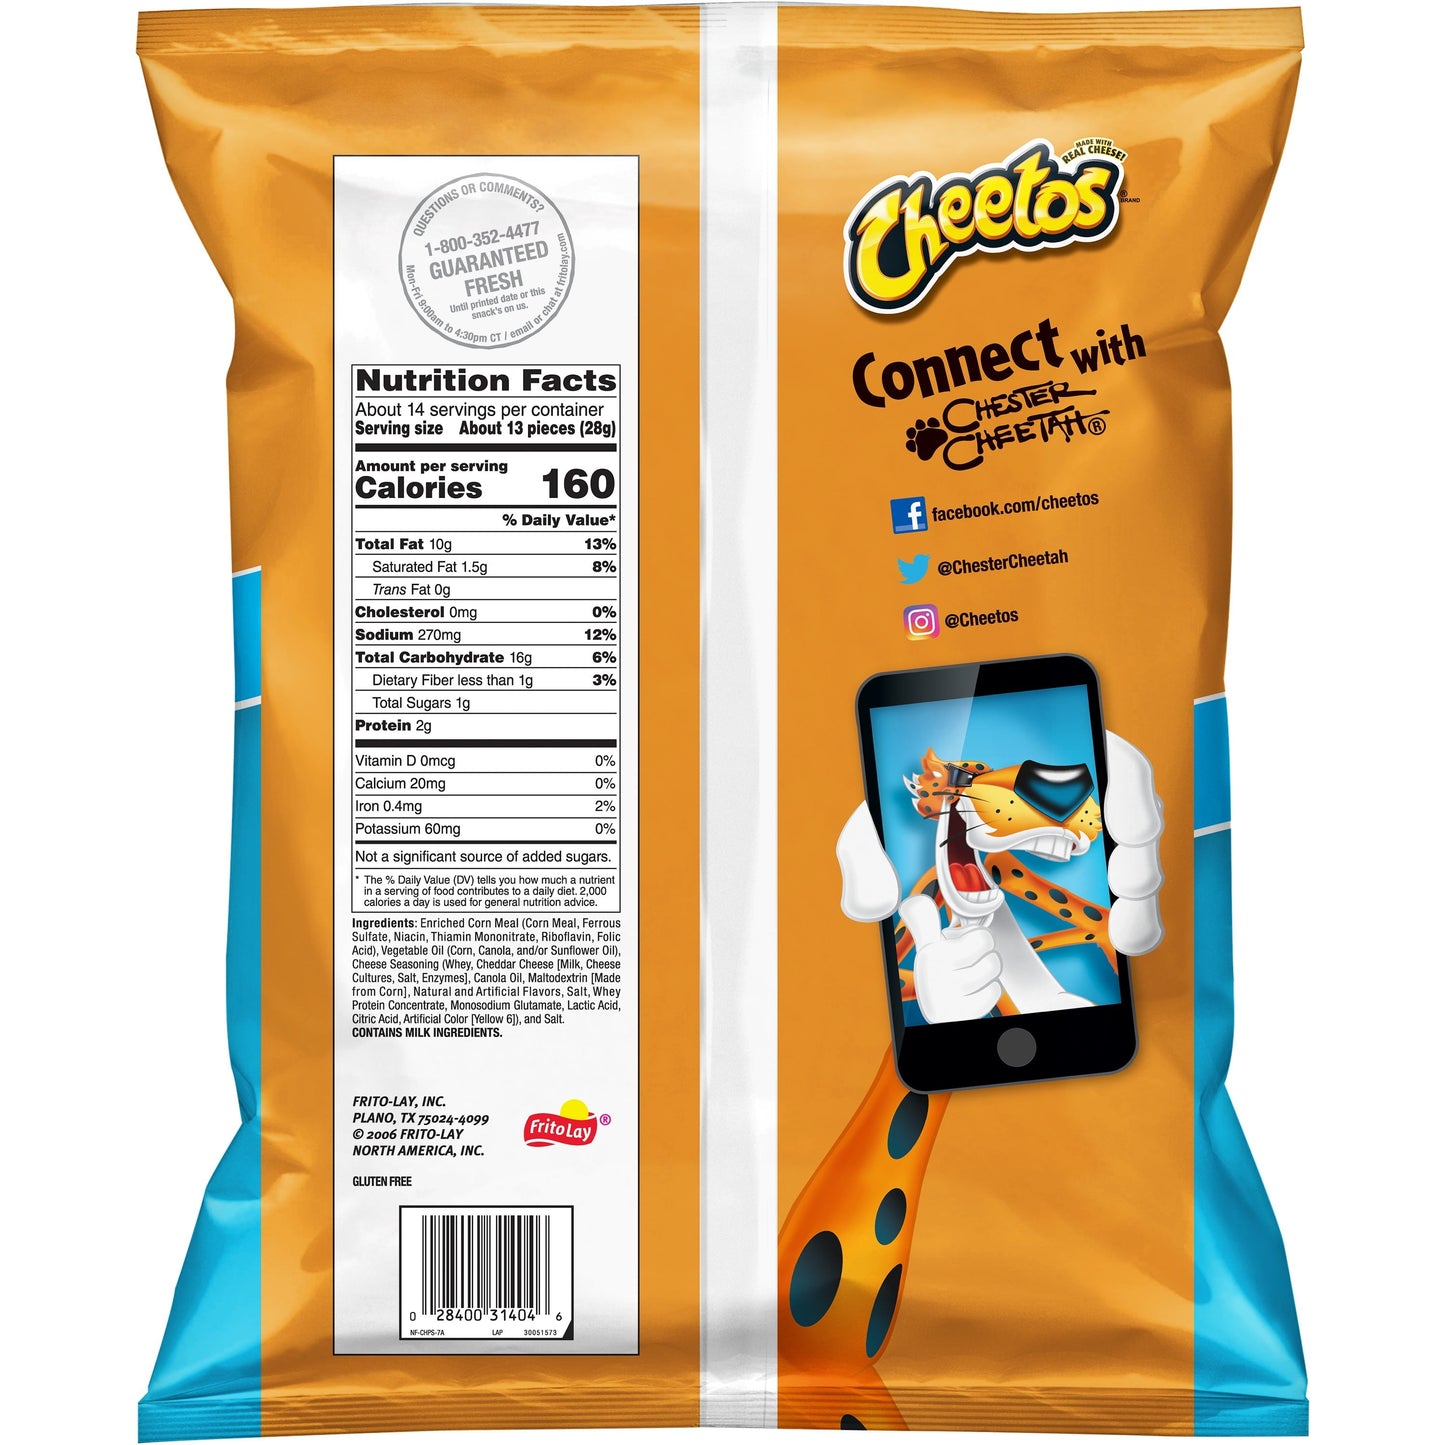 Cheese Puff Chips, 13.5Oz Party Bag